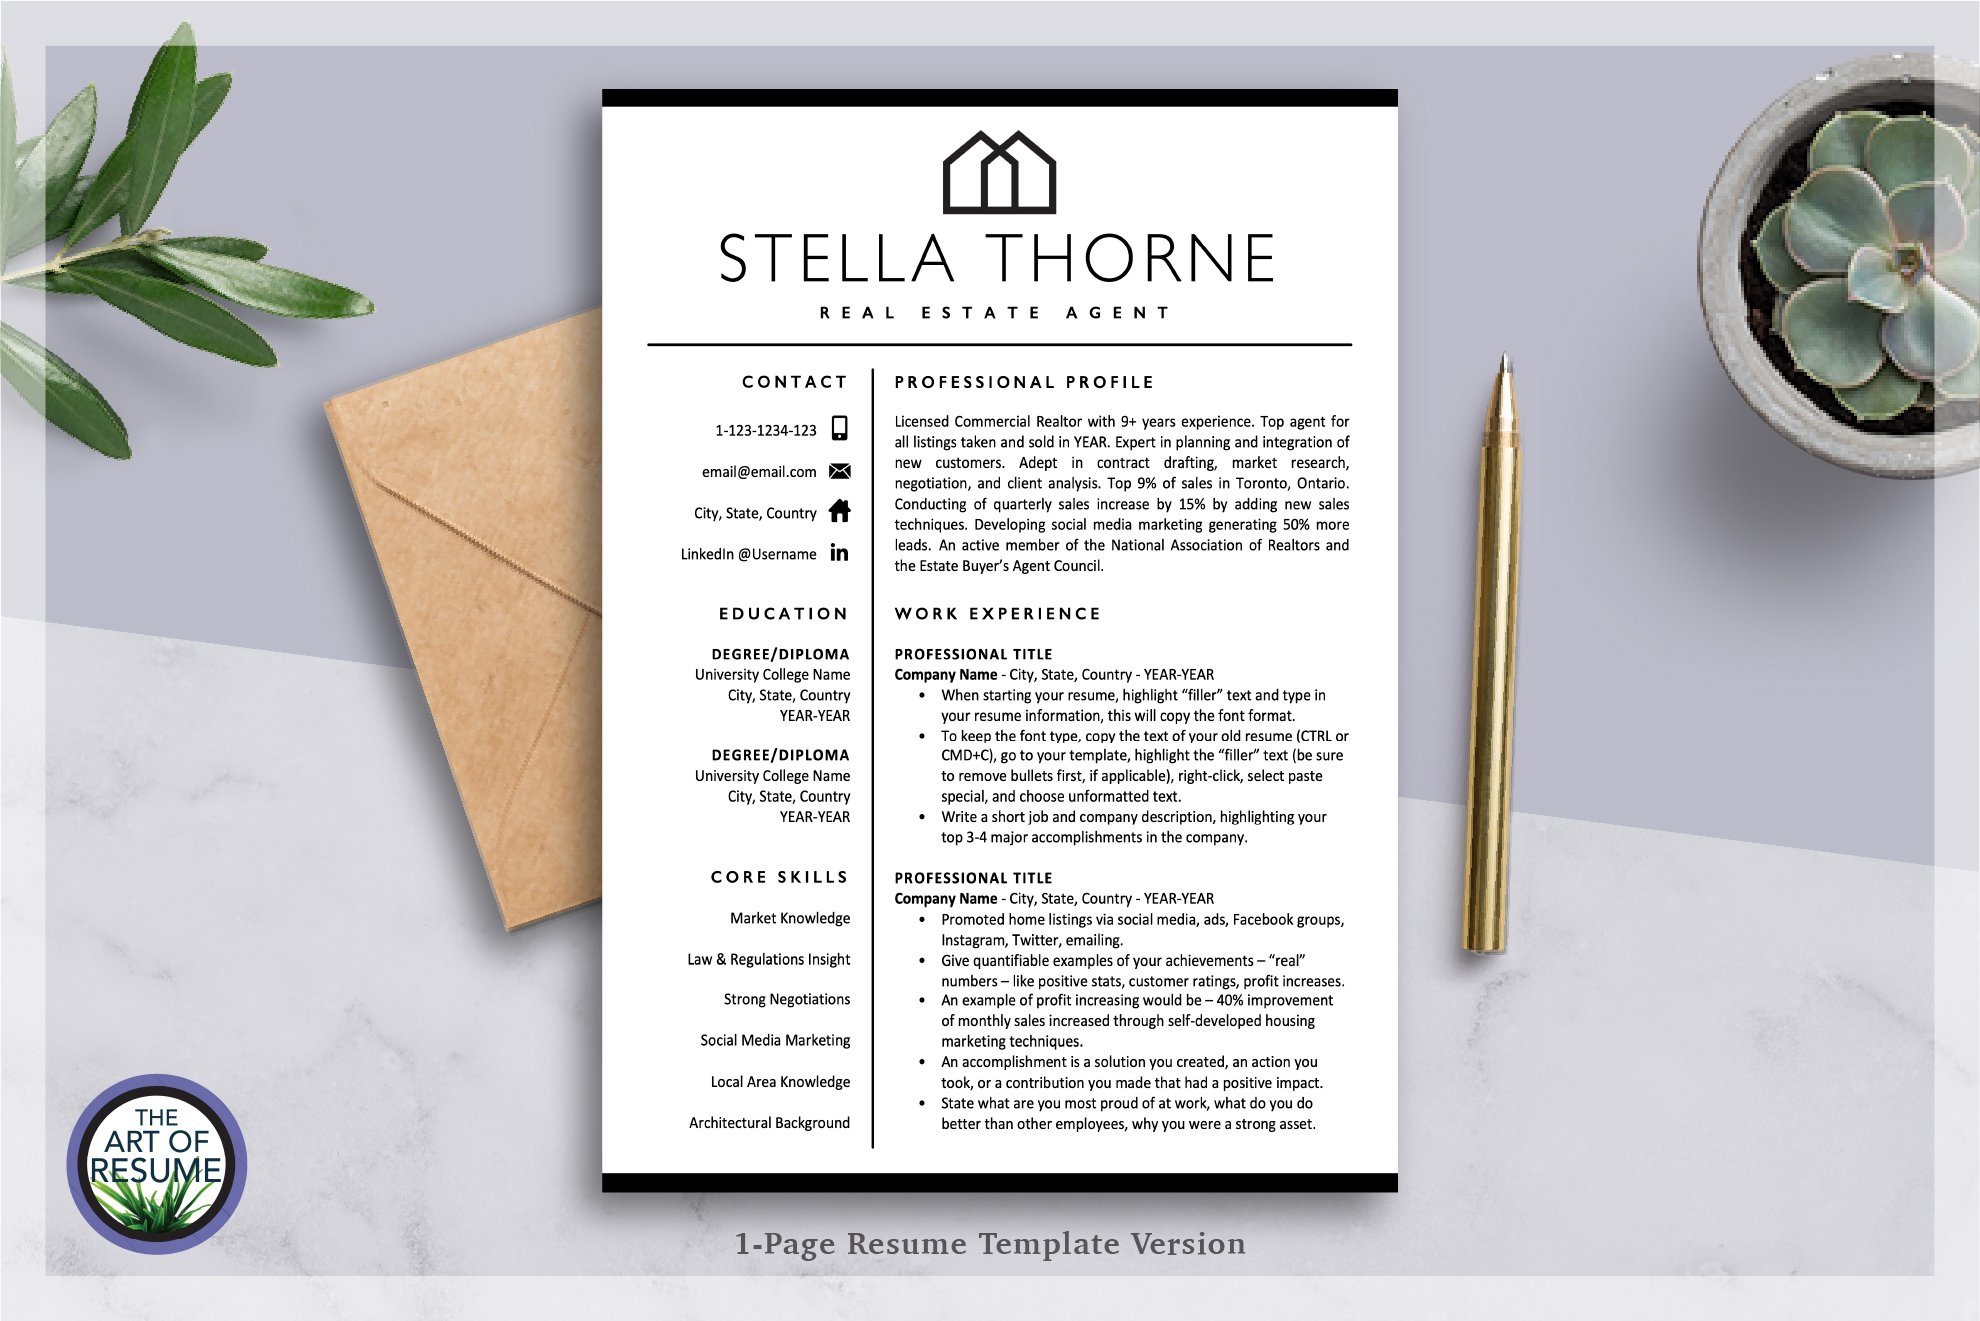 Resume Template Real Estate Agent CV preview image.